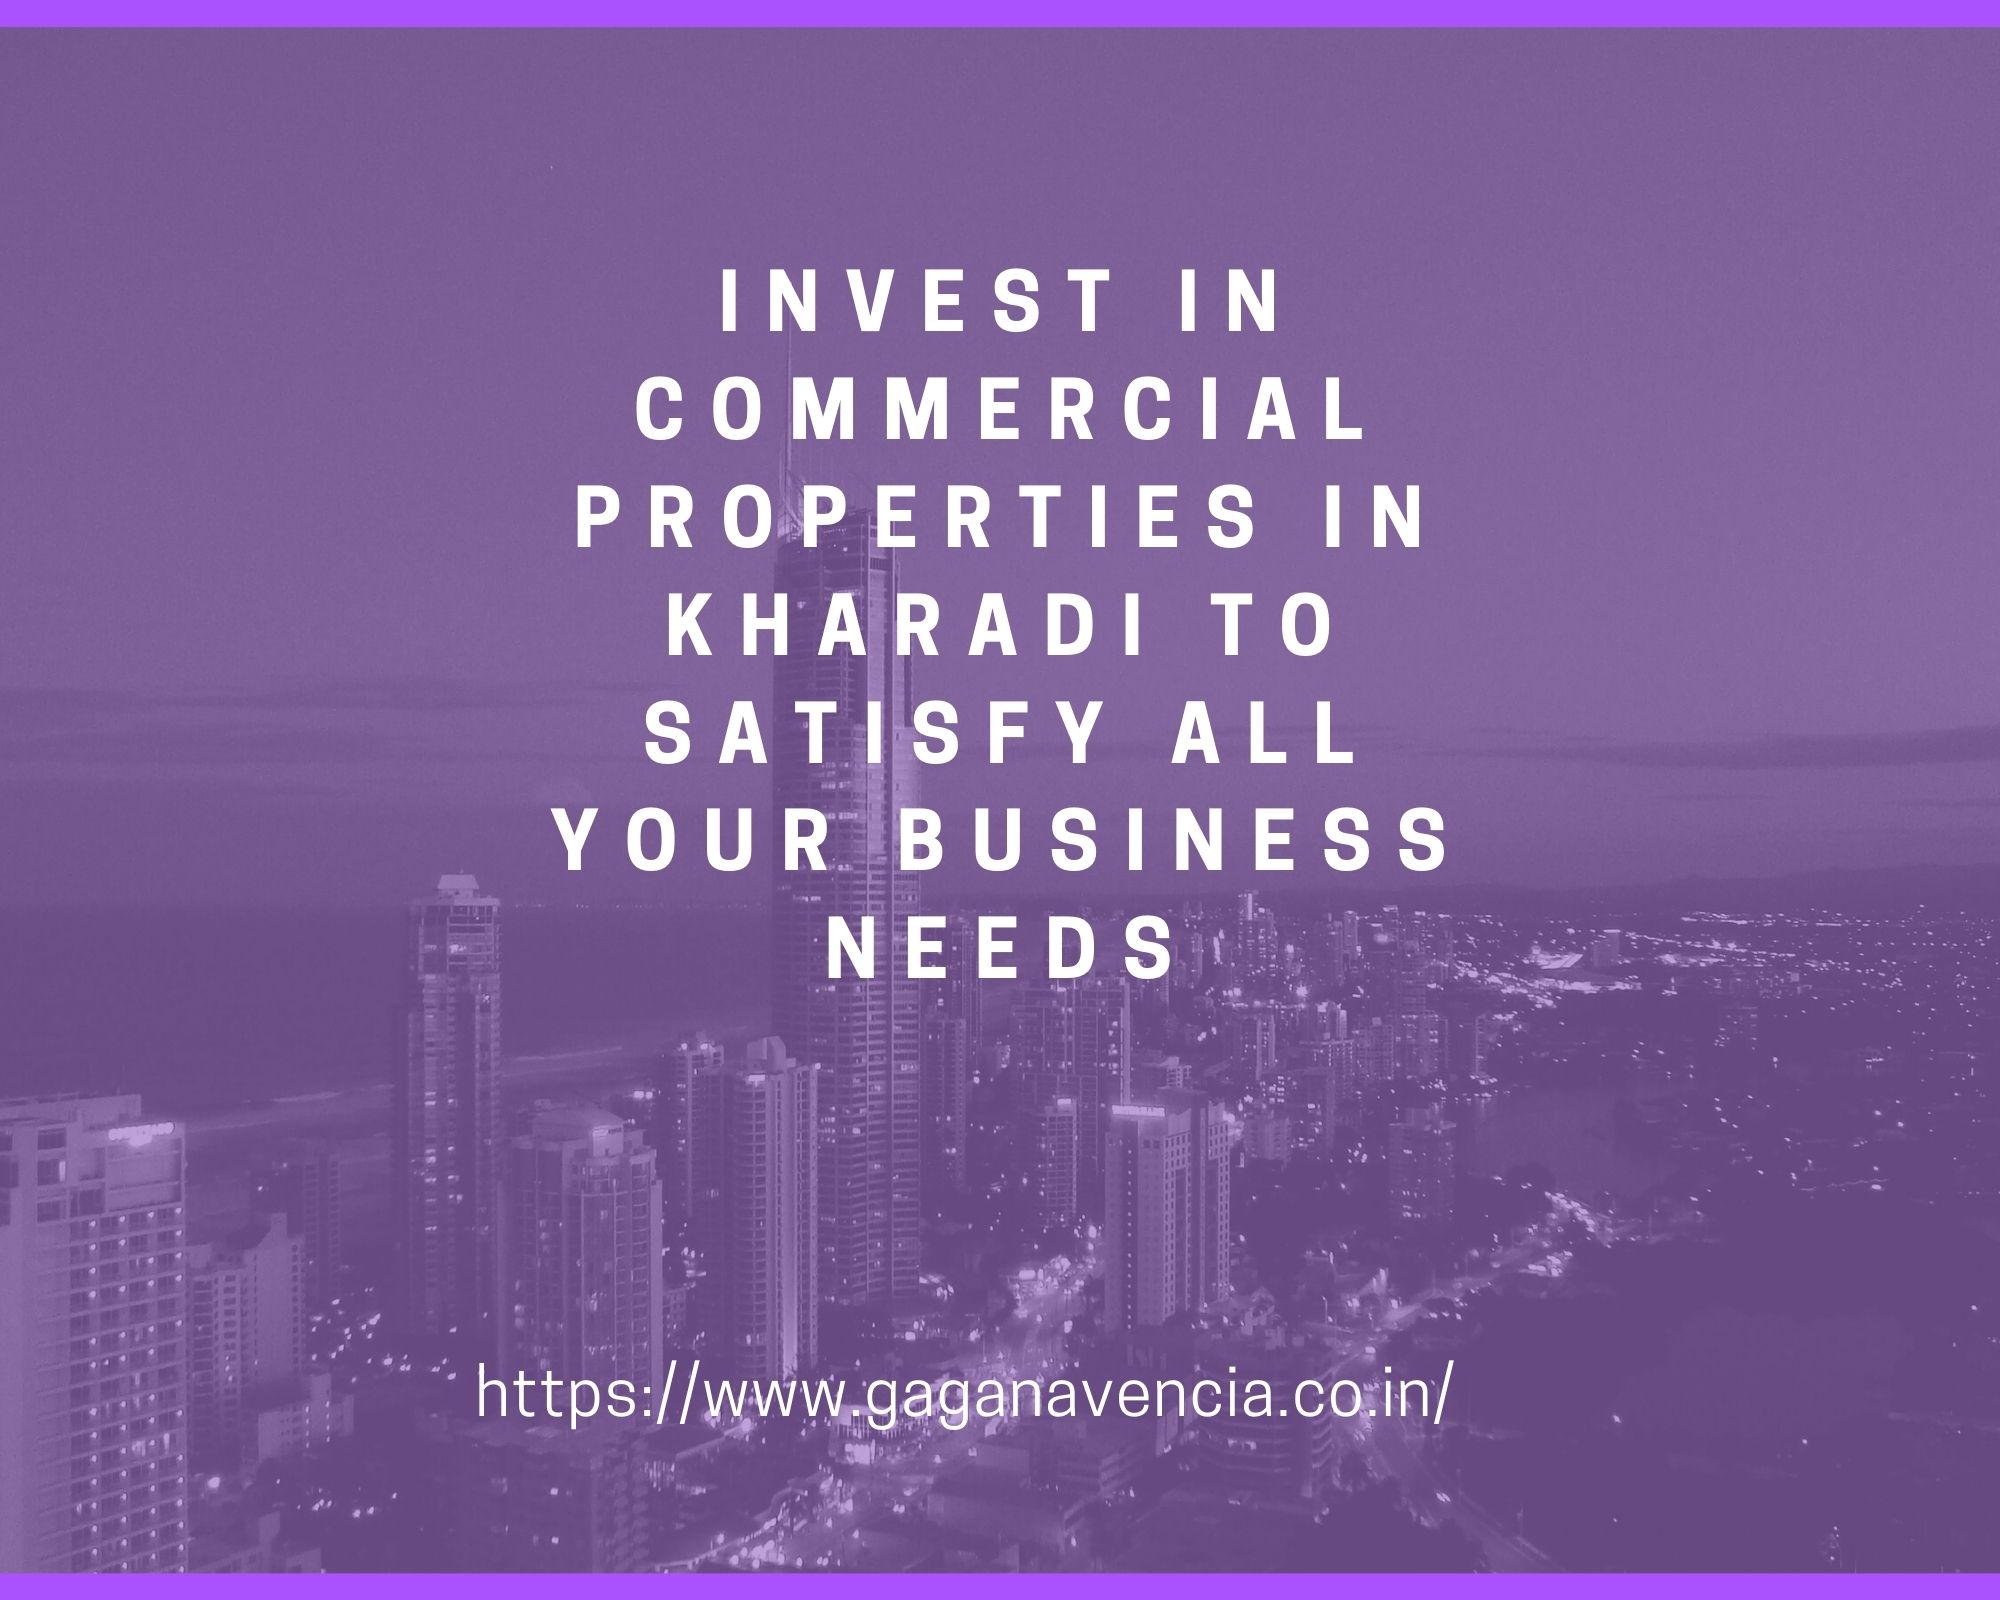 Invest in commercial properties in Kharadi to satisfy all your business needs